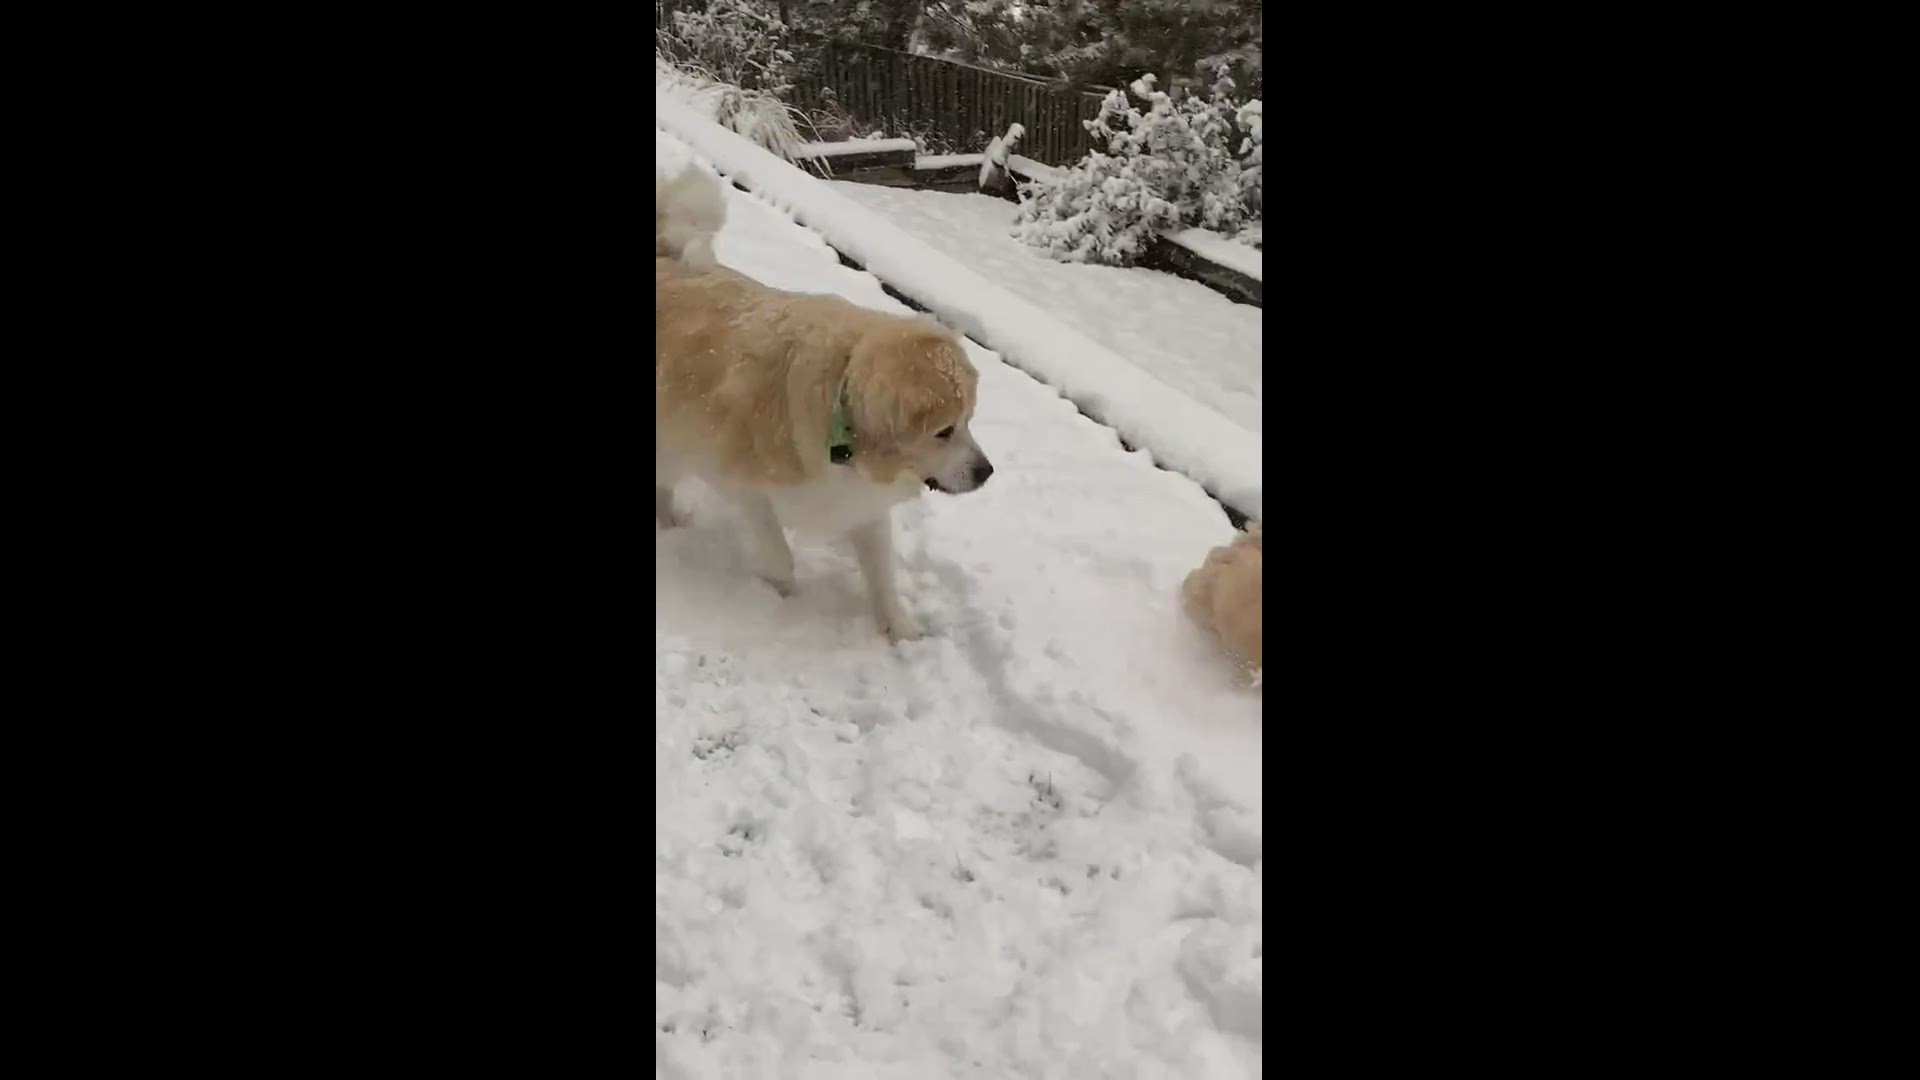 Cathy Maitland shared this video from the first snow of the season with KTVB using the "Near Me" feature in our app.
Credit: Cathy Maitland